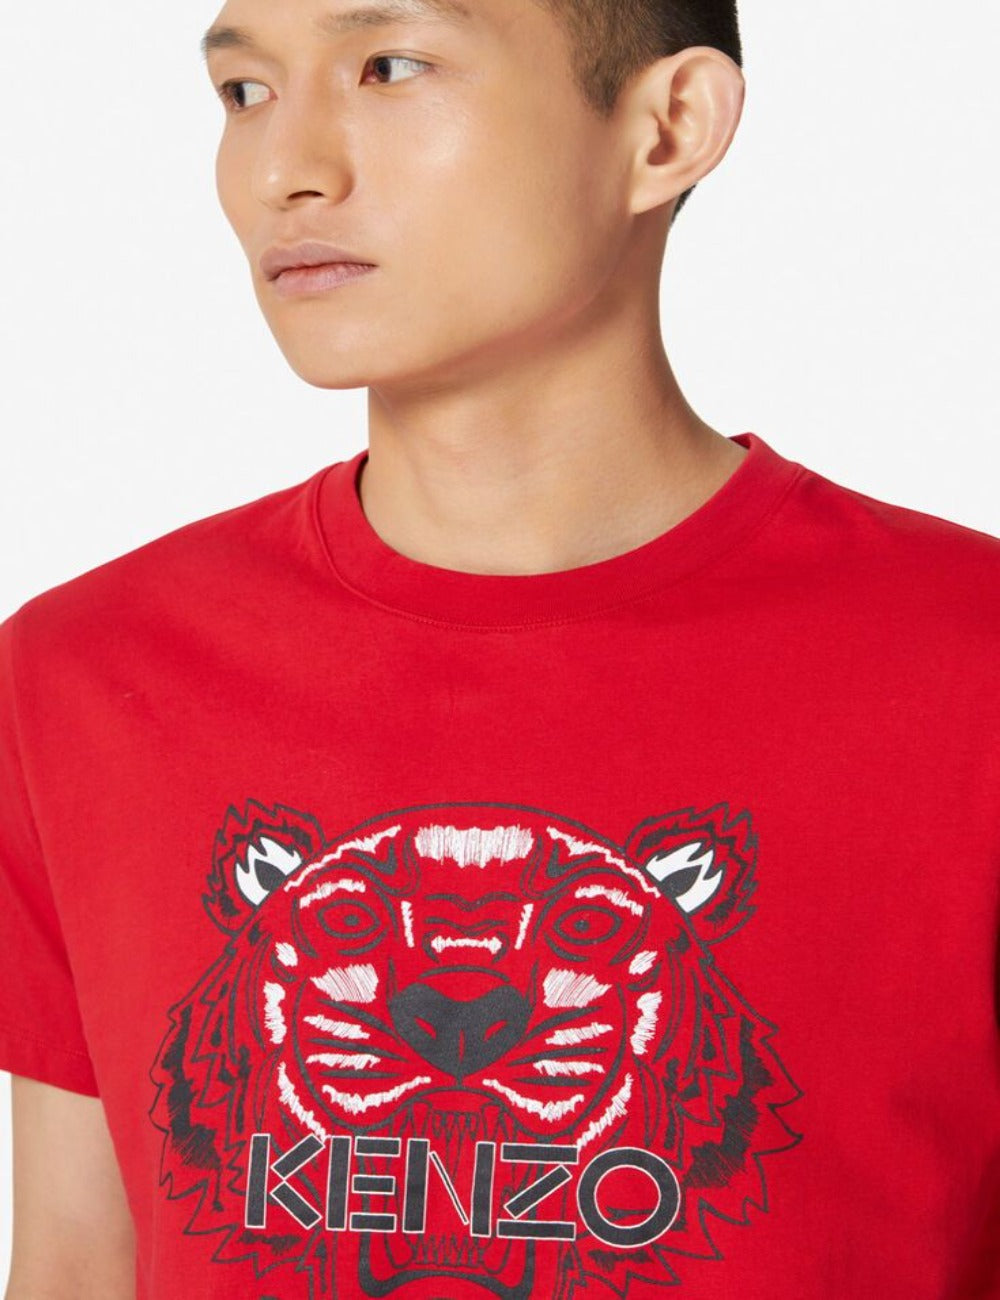 Kenzo Red Tiger Logo T-Shirt - Shop Streetwear, Sneakers, Slippers and Gifts online | Malaysia - The Factory KL